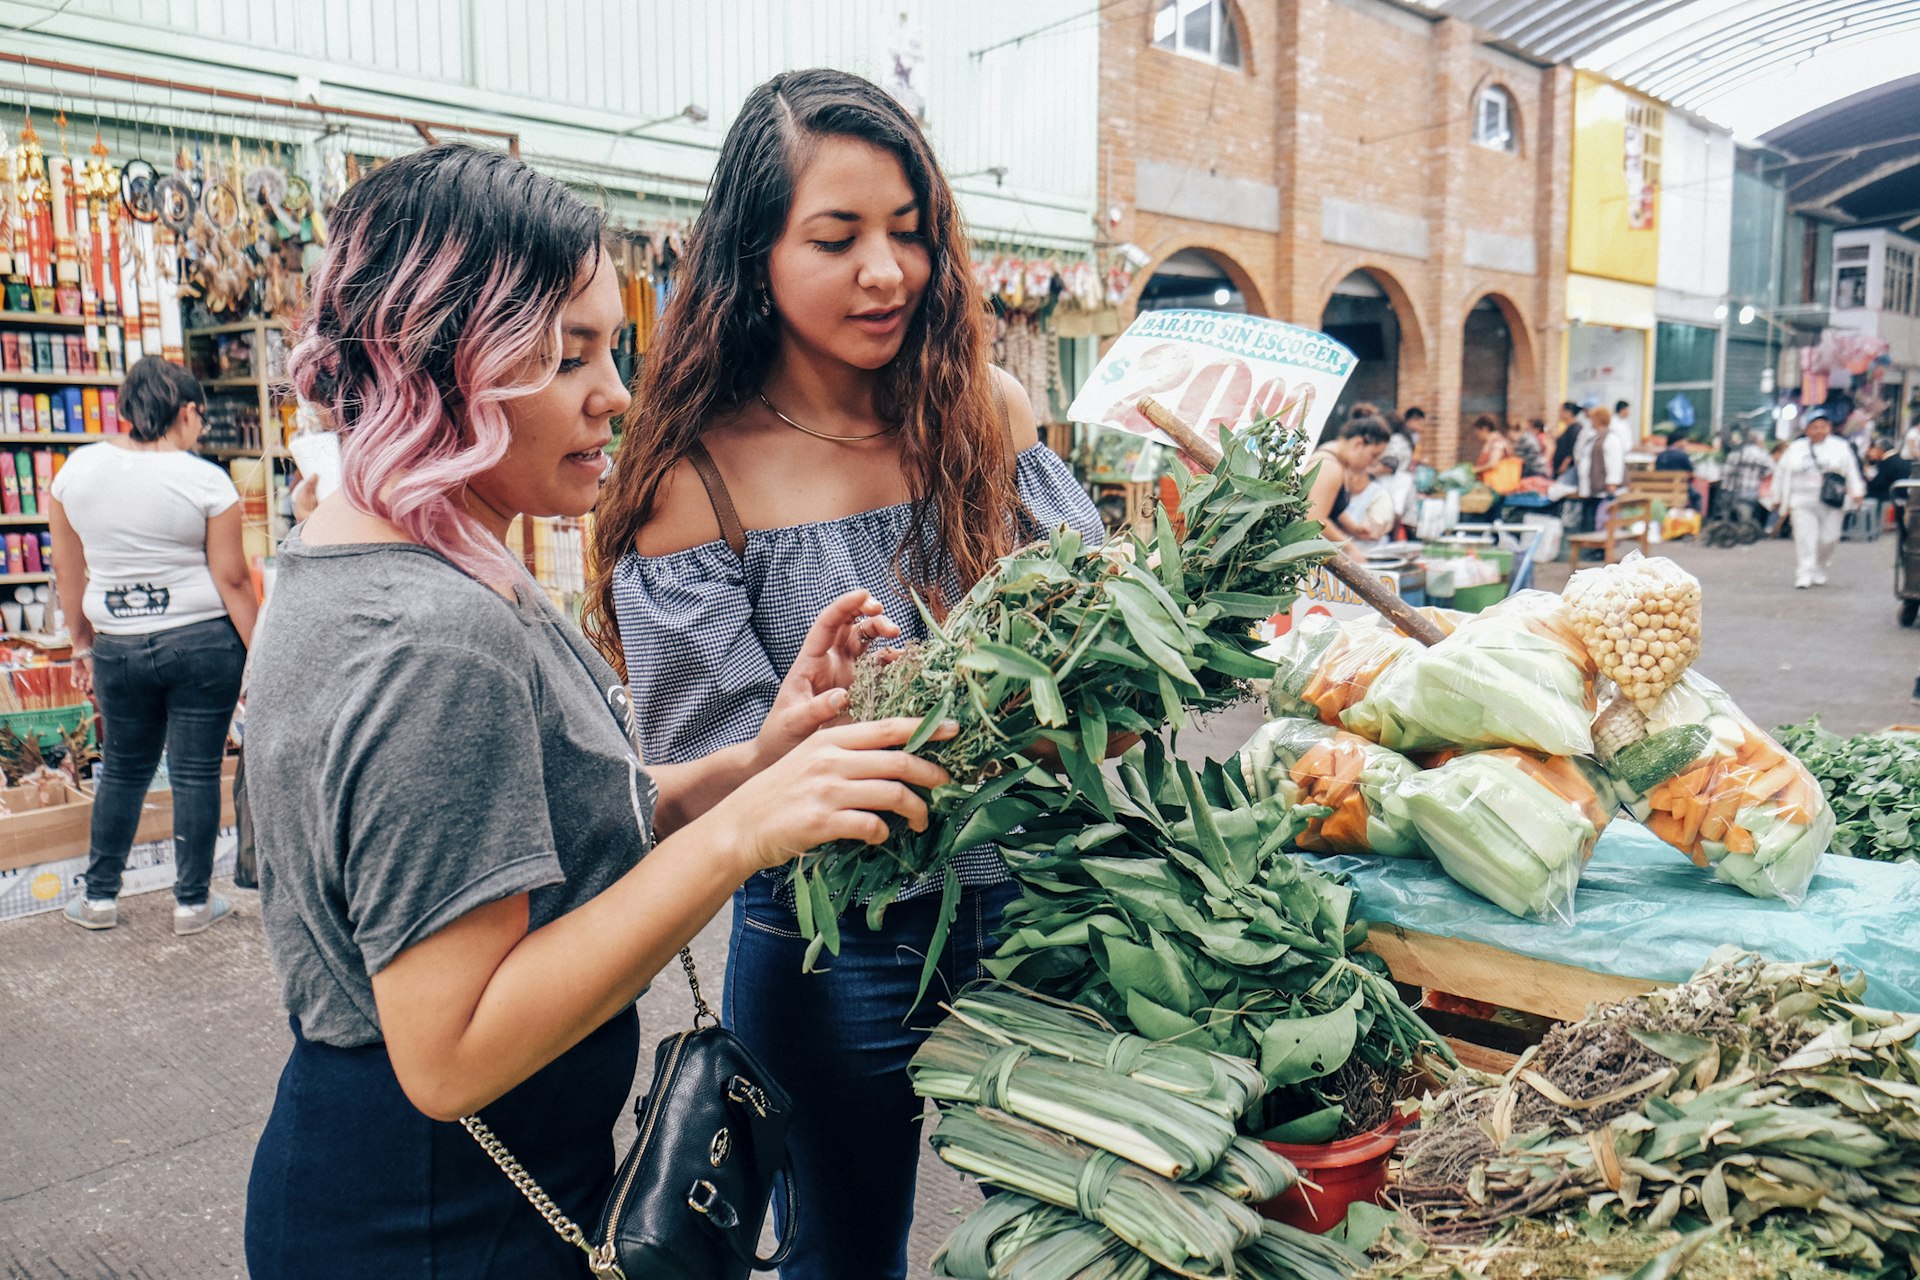 GettyImages-638344728.jpgTwo women friends looking at vegetables in an open-air market in Mexico City